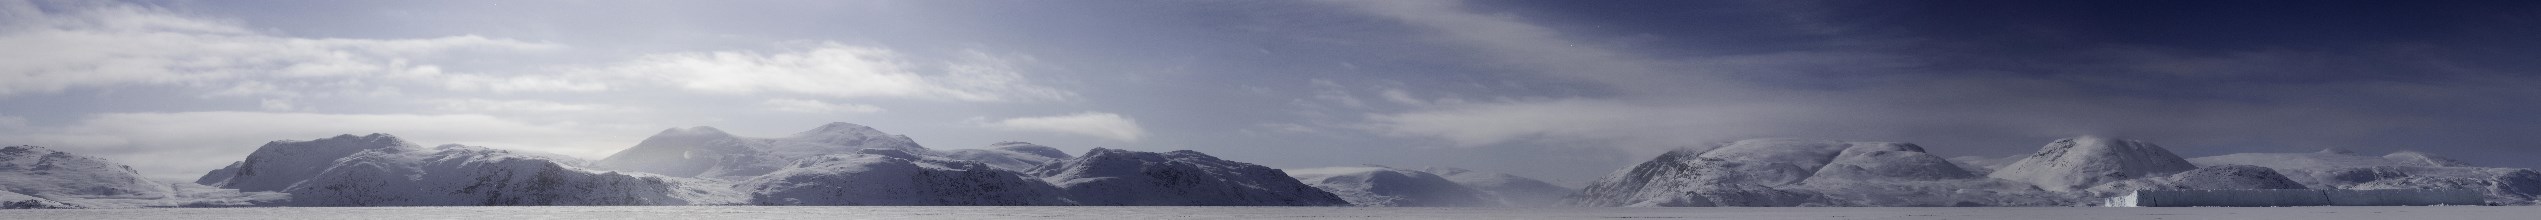 Panoramic view of snow-covered mountains seen from a frozen fjord